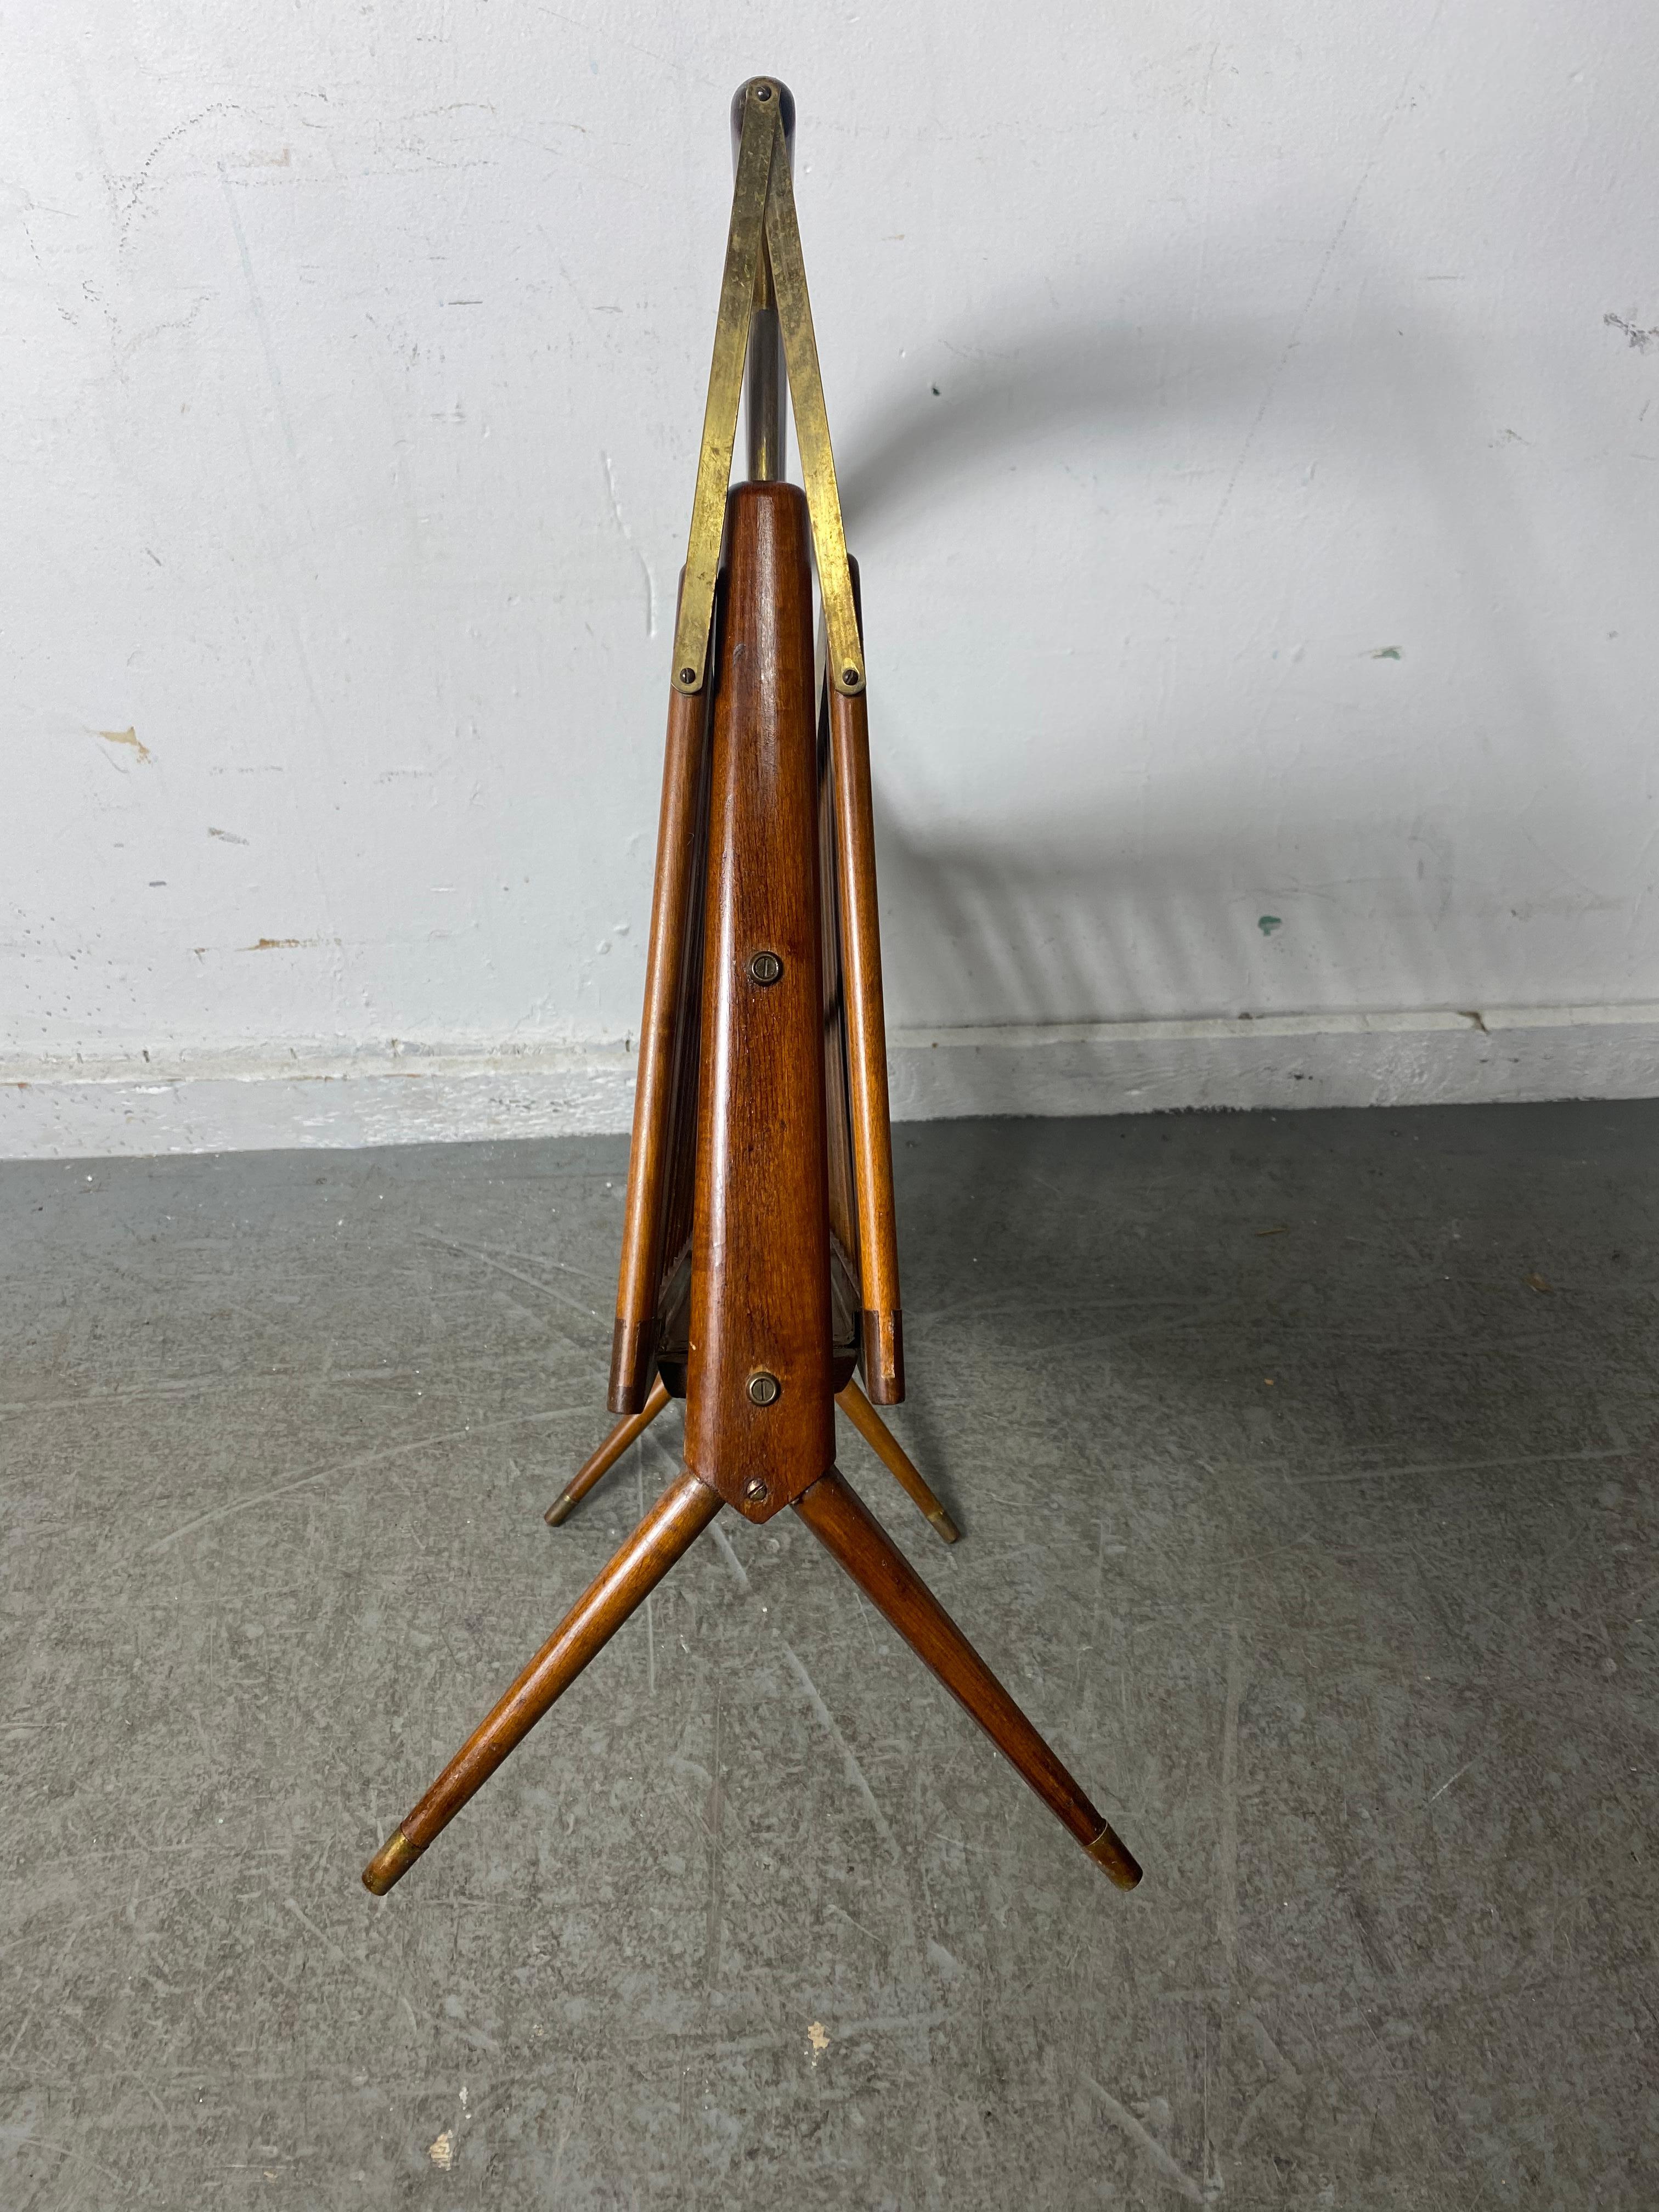 Italian, Mid-Century Modern, walnut and brass, magazine holder by Cesare Lacca folds up from it's handle for mobility, Ingenious design.